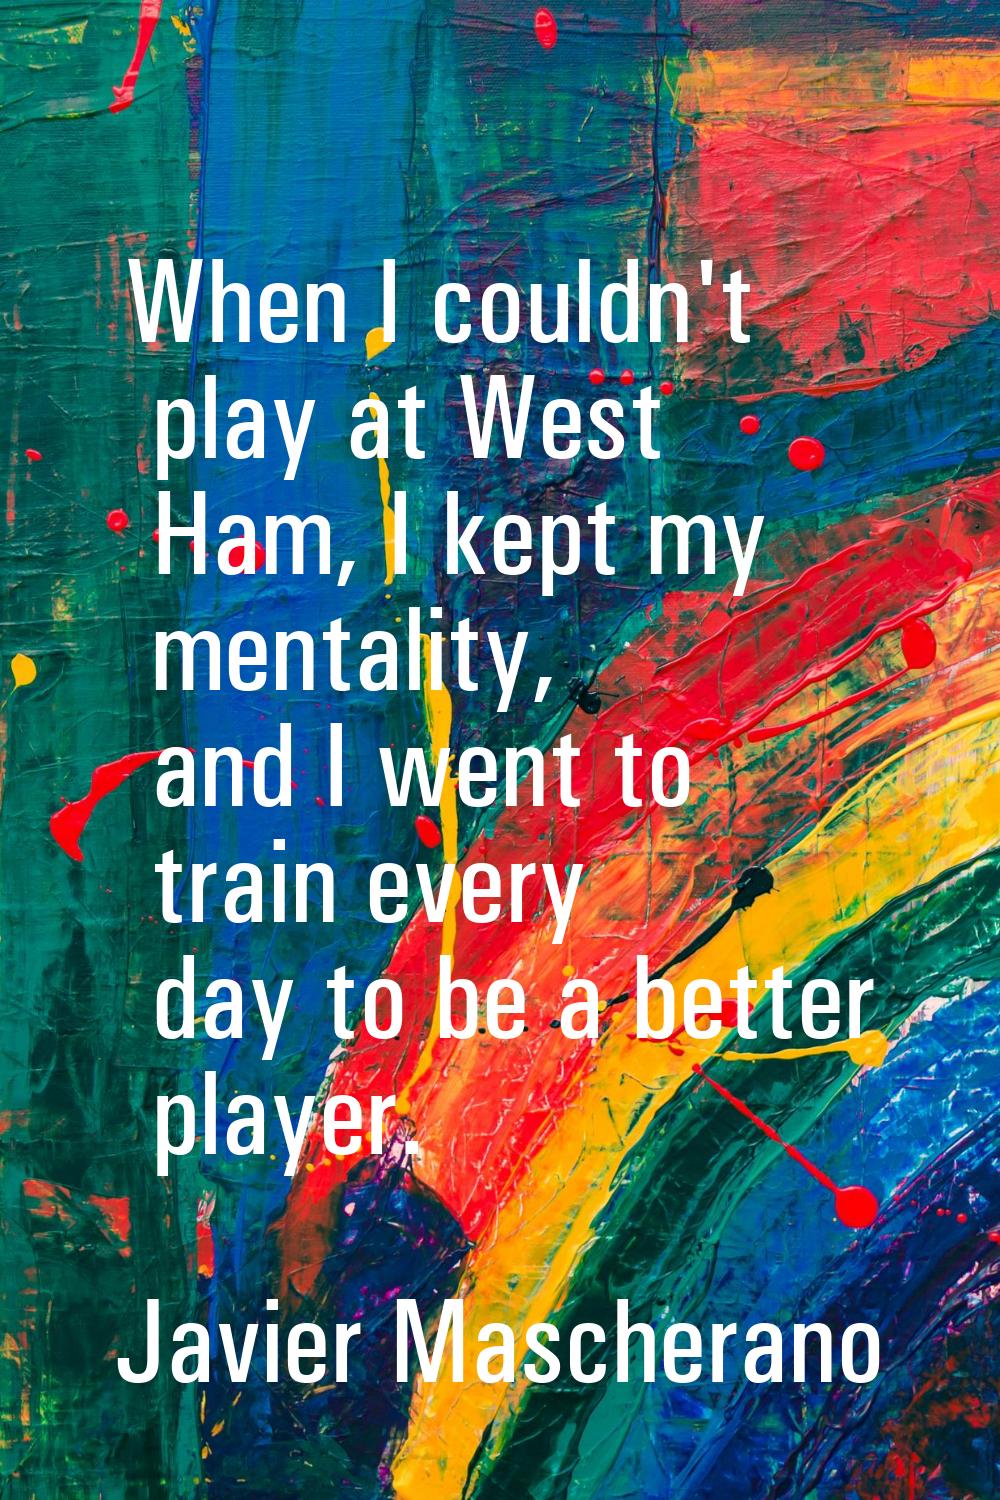 When I couldn't play at West Ham, I kept my mentality, and I went to train every day to be a better